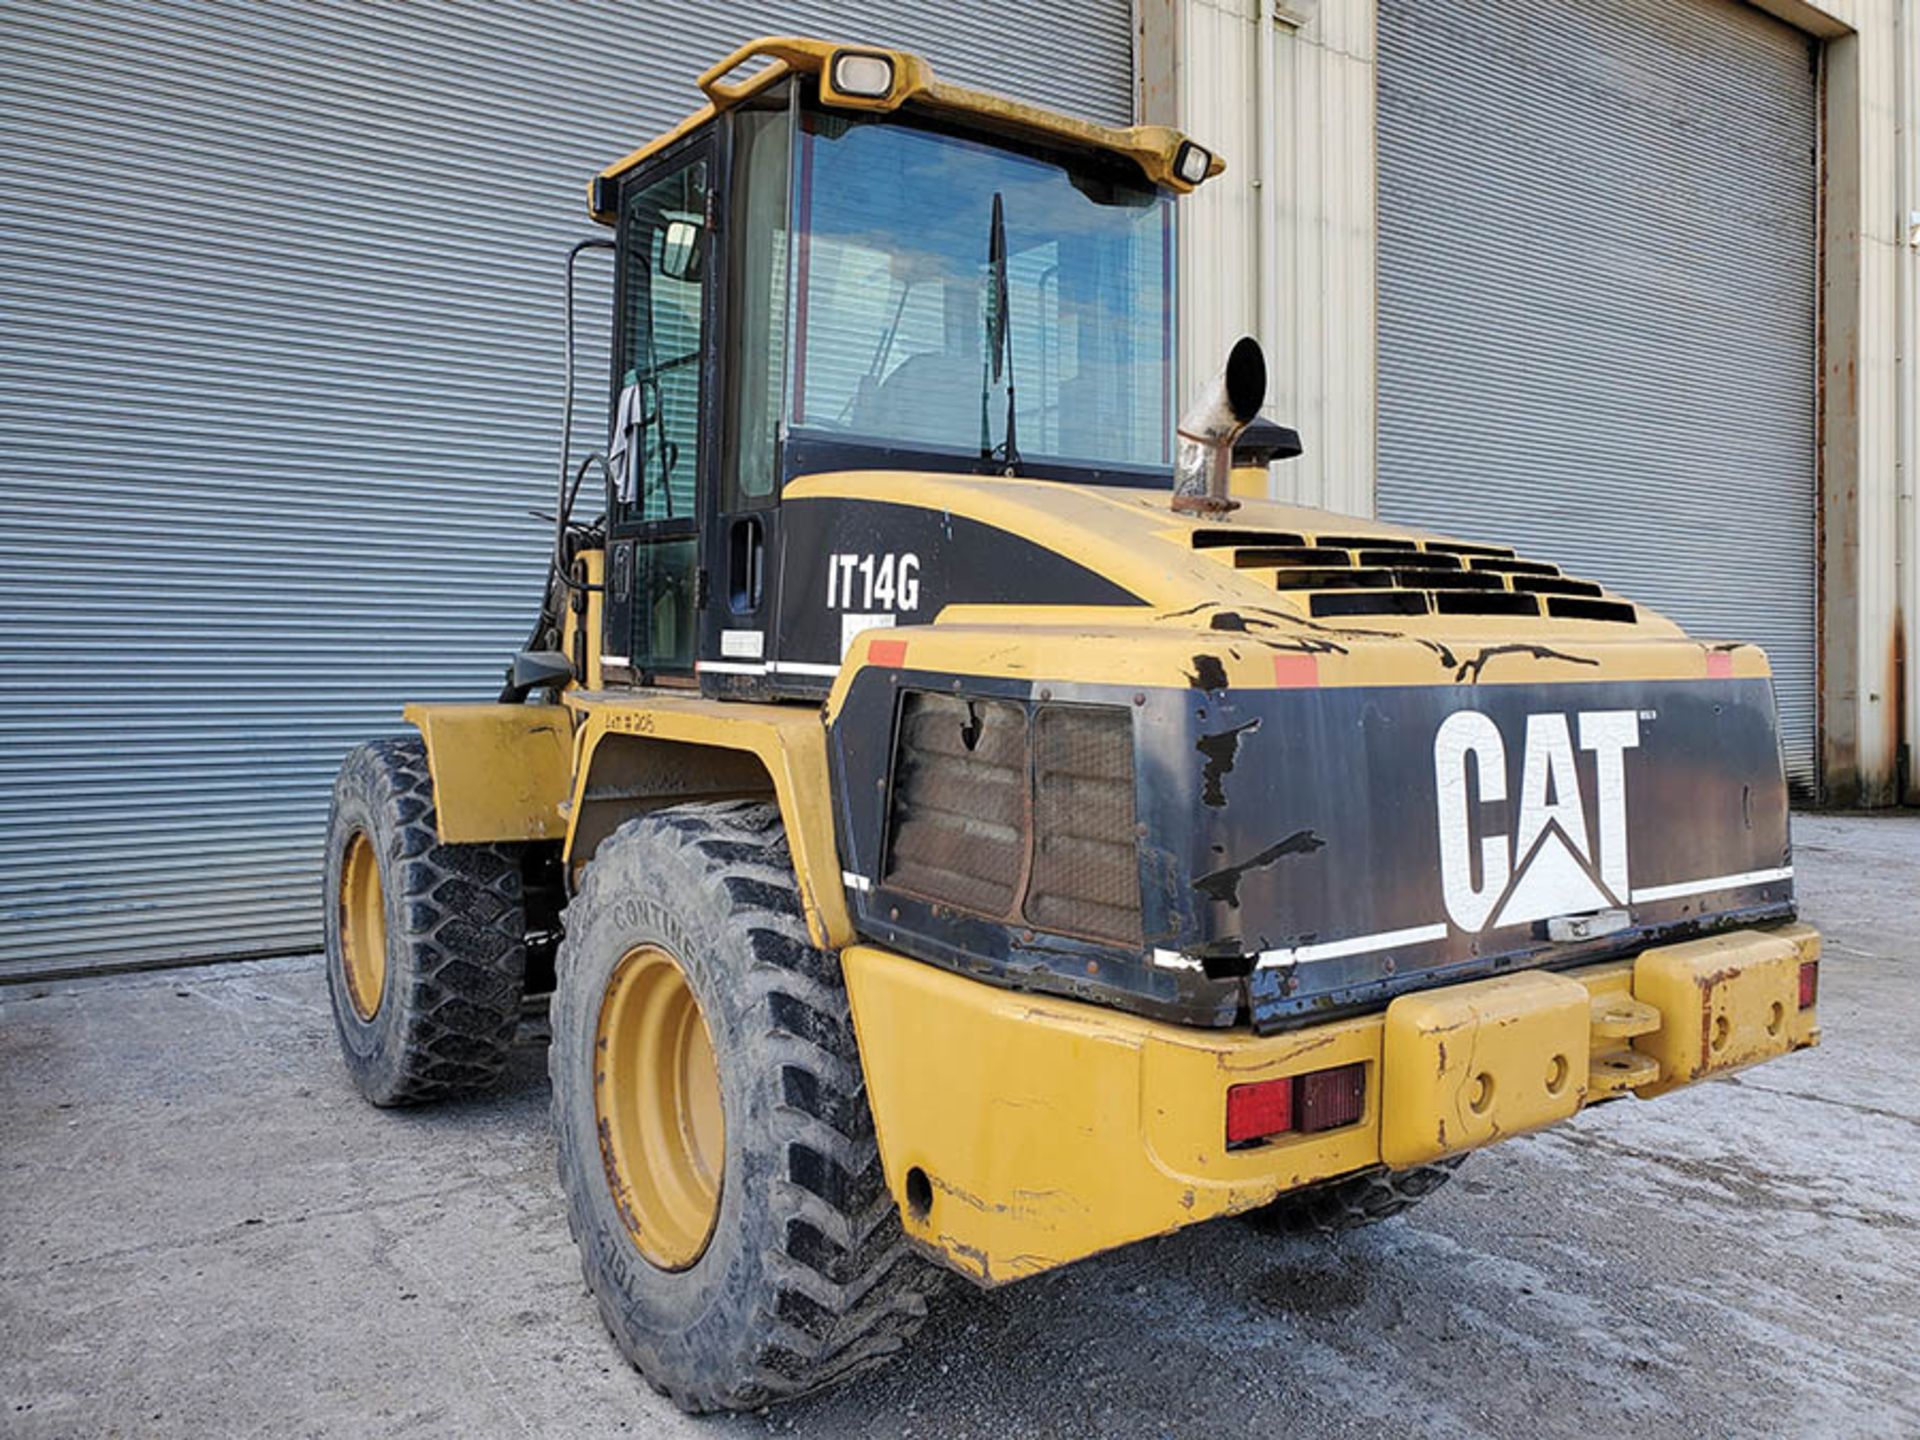 CATERPILLAR IT14G WHEEL LOADER WITH FORKS & BUCKET, PIN 8ZM00195 - Image 8 of 11